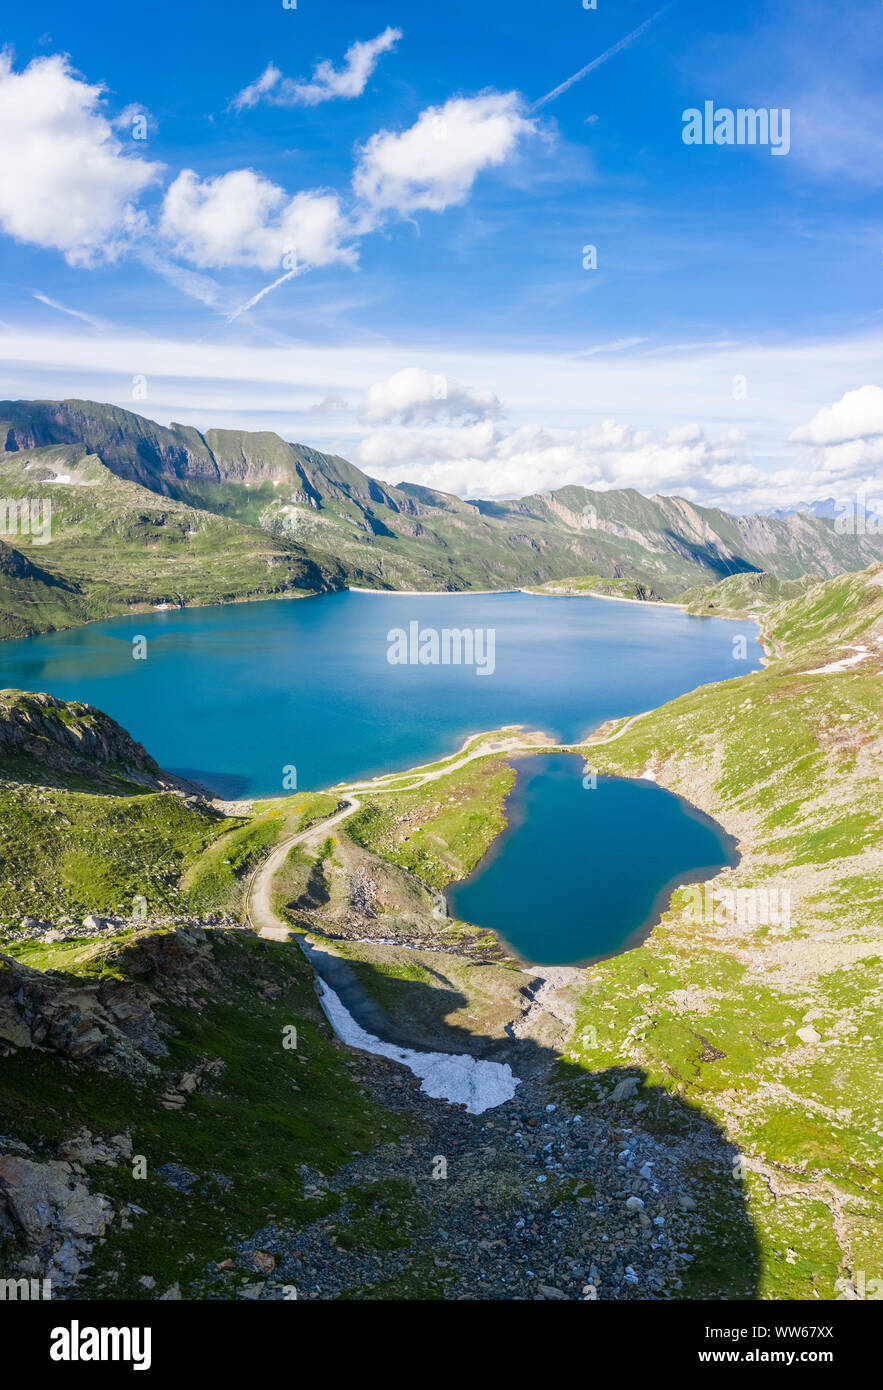 Aerial view of the Naret lake in Lavizzara Valley, Maggia Valley, Lepontine Alps, Canton Ticino, Switzerland. Stock Photo